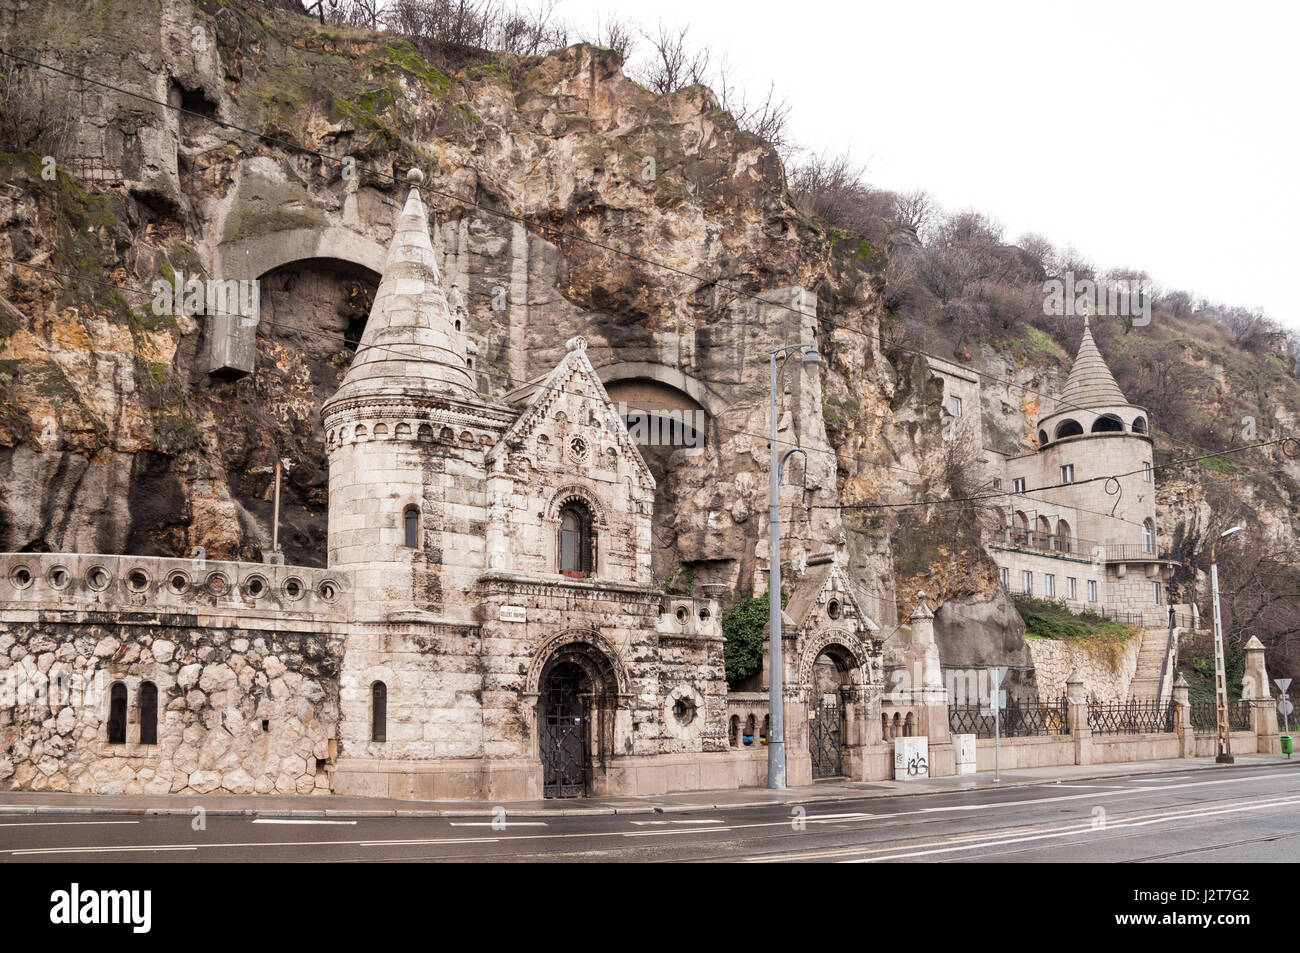 Facade of the Cave Church located inside Gellert Hill in Budapest, Hungary Stock Photo